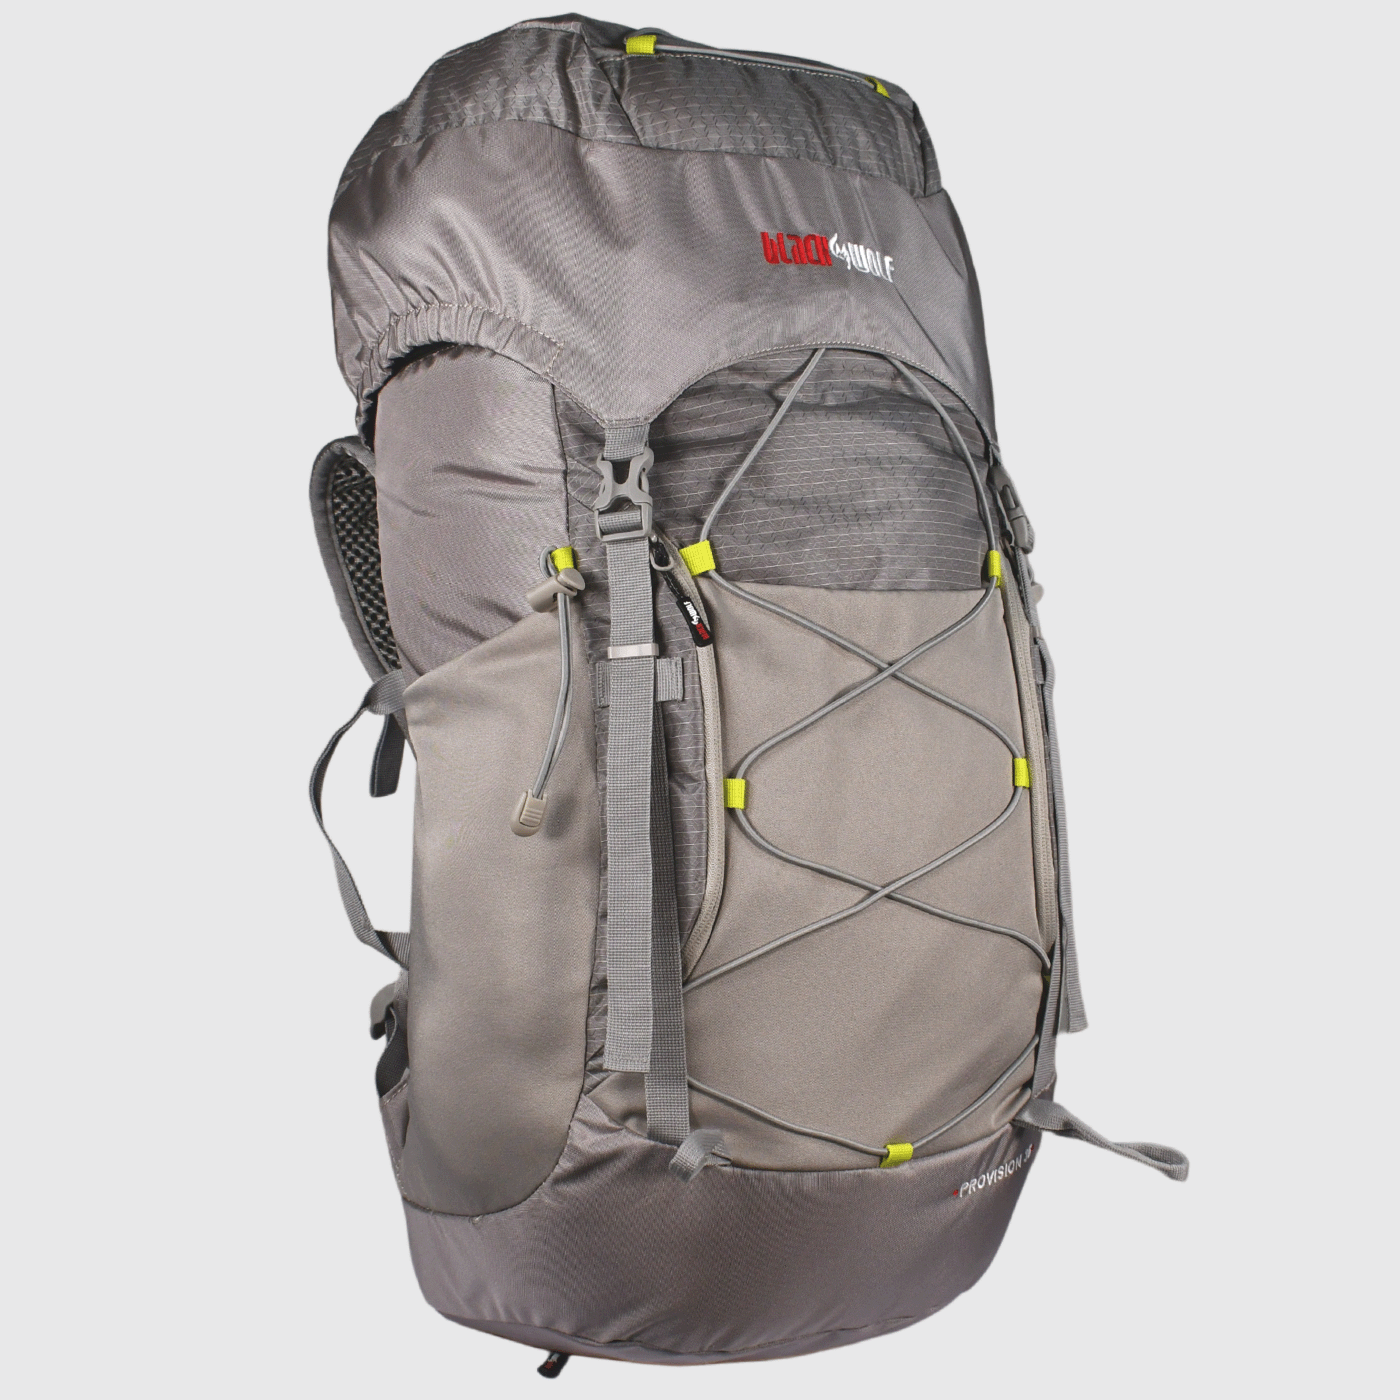 Provision 55L Backpack